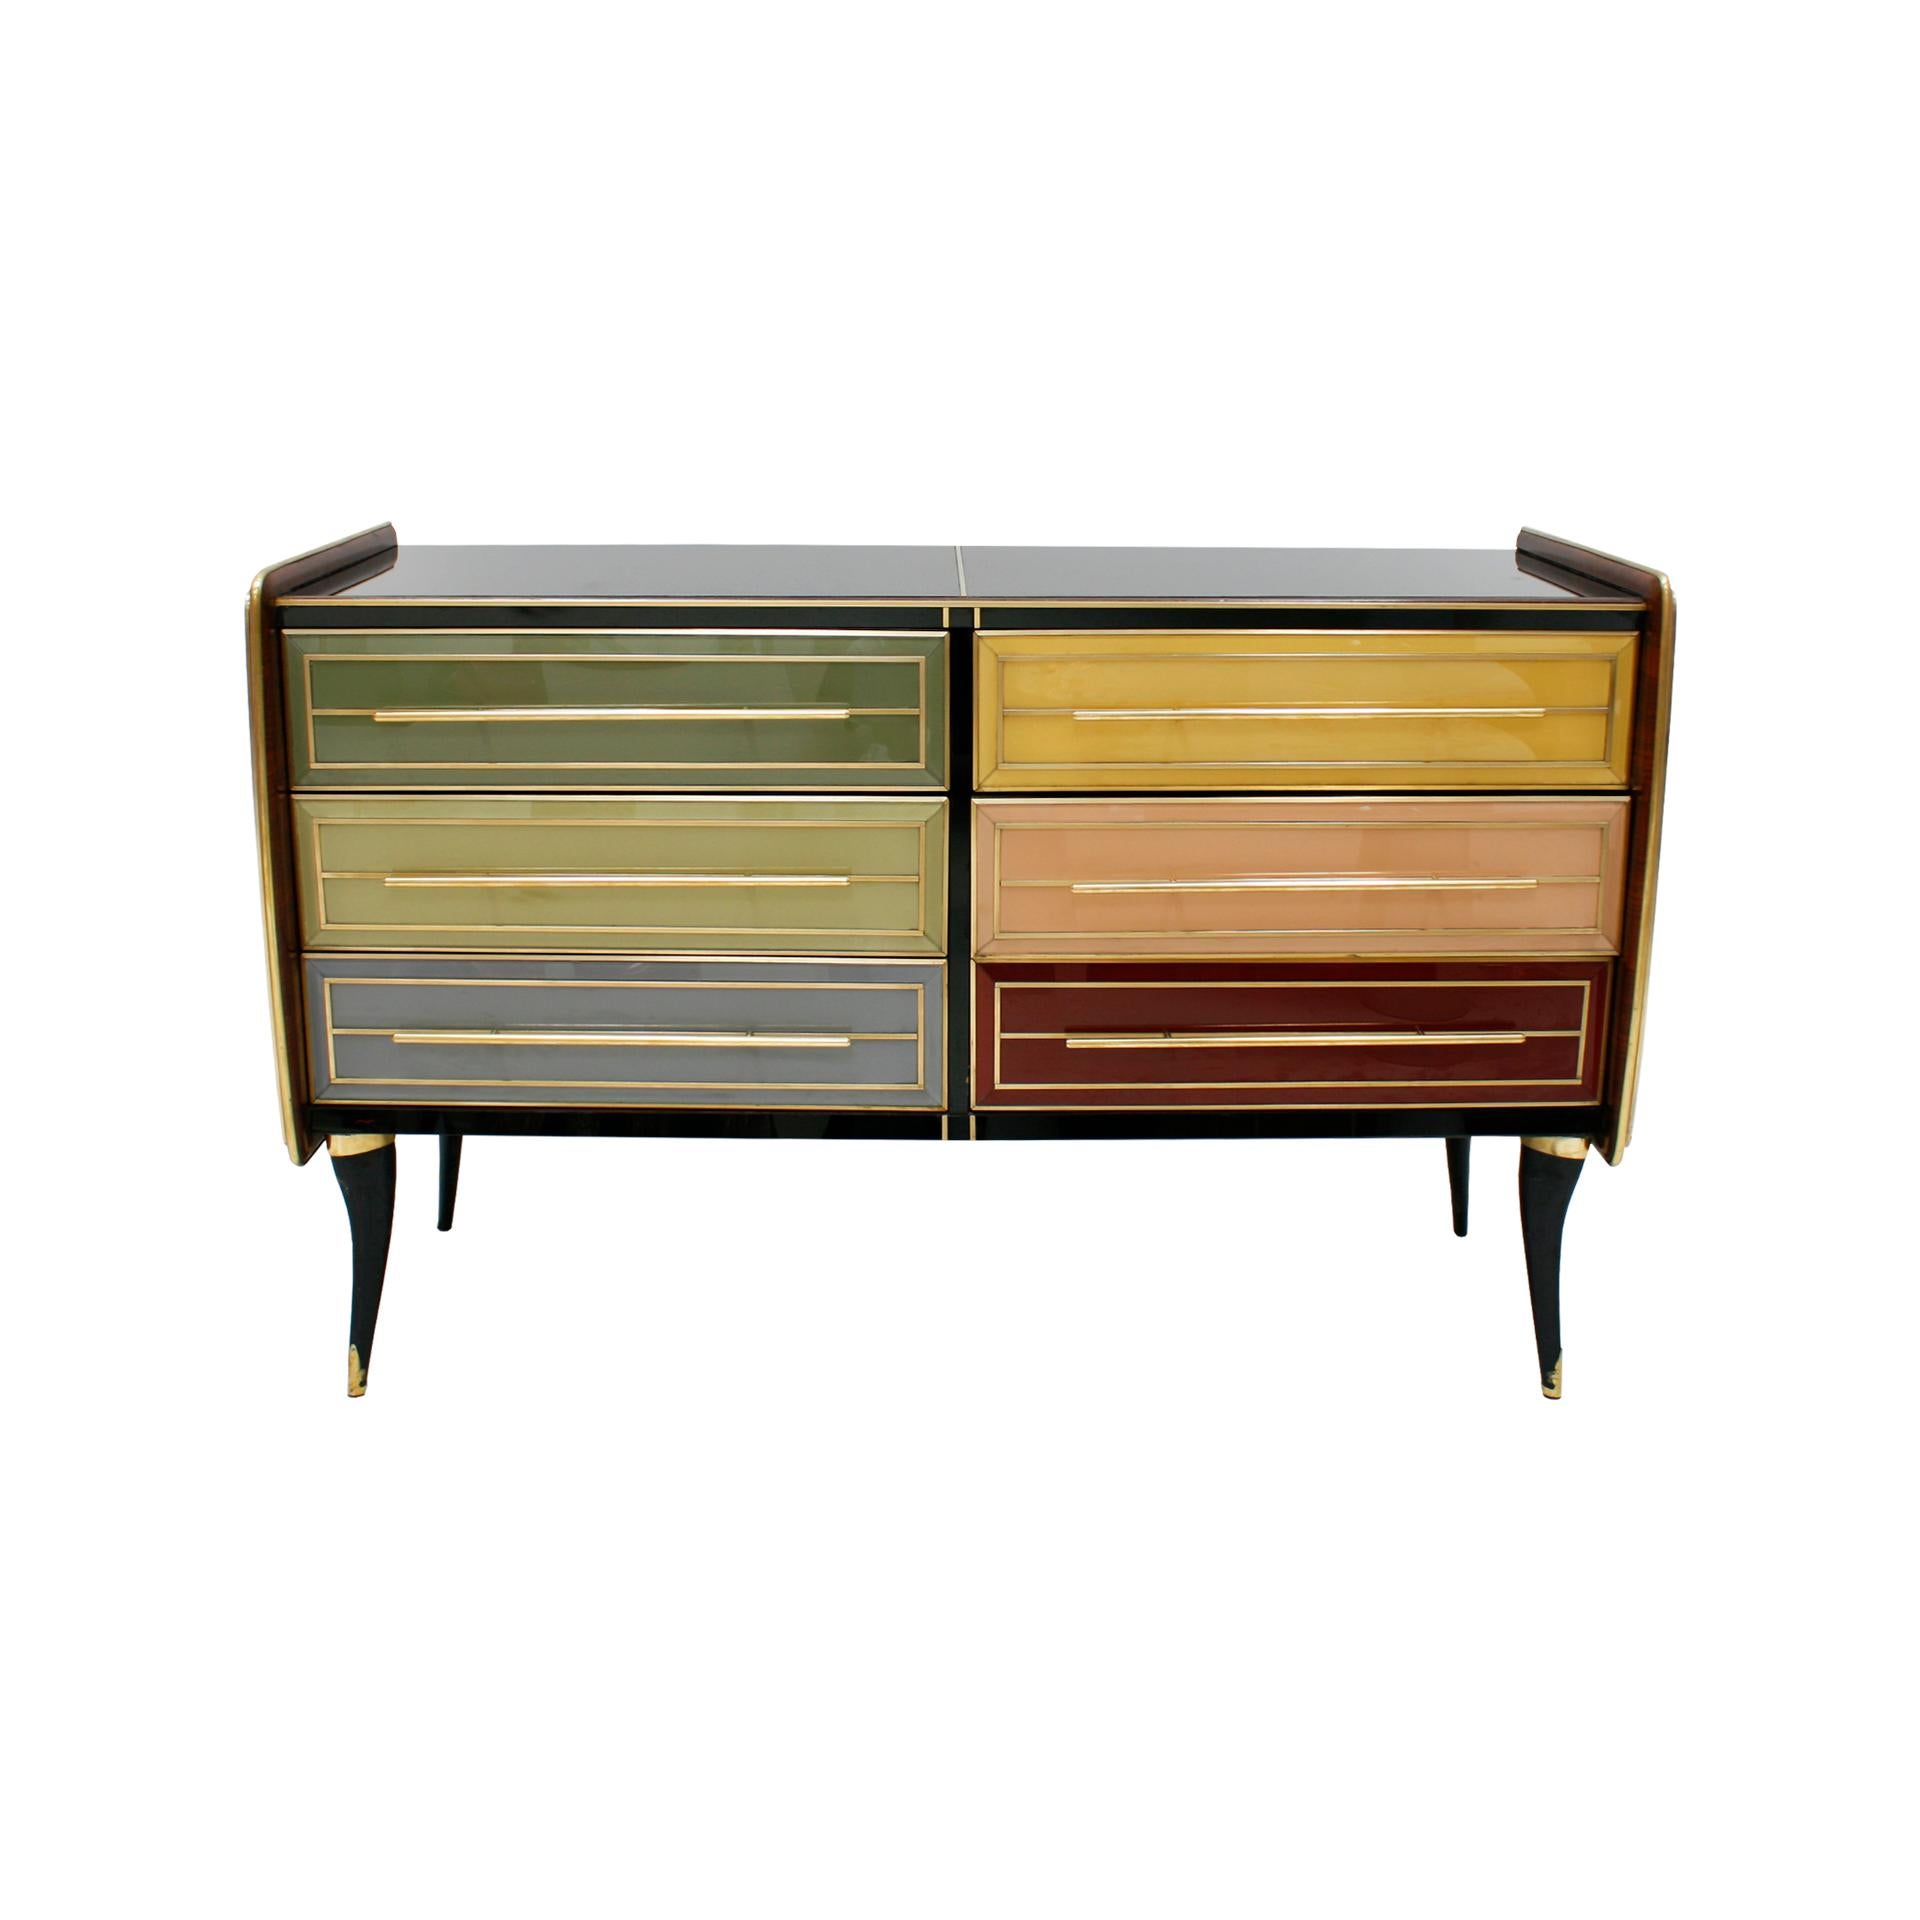 Italian sideboard composed of six drawers. Original structure from 1950s made of solid wood and covered in colored glass. Handles and details made of brass.

Our main target is customer satisfaction, so we include in the price for this item